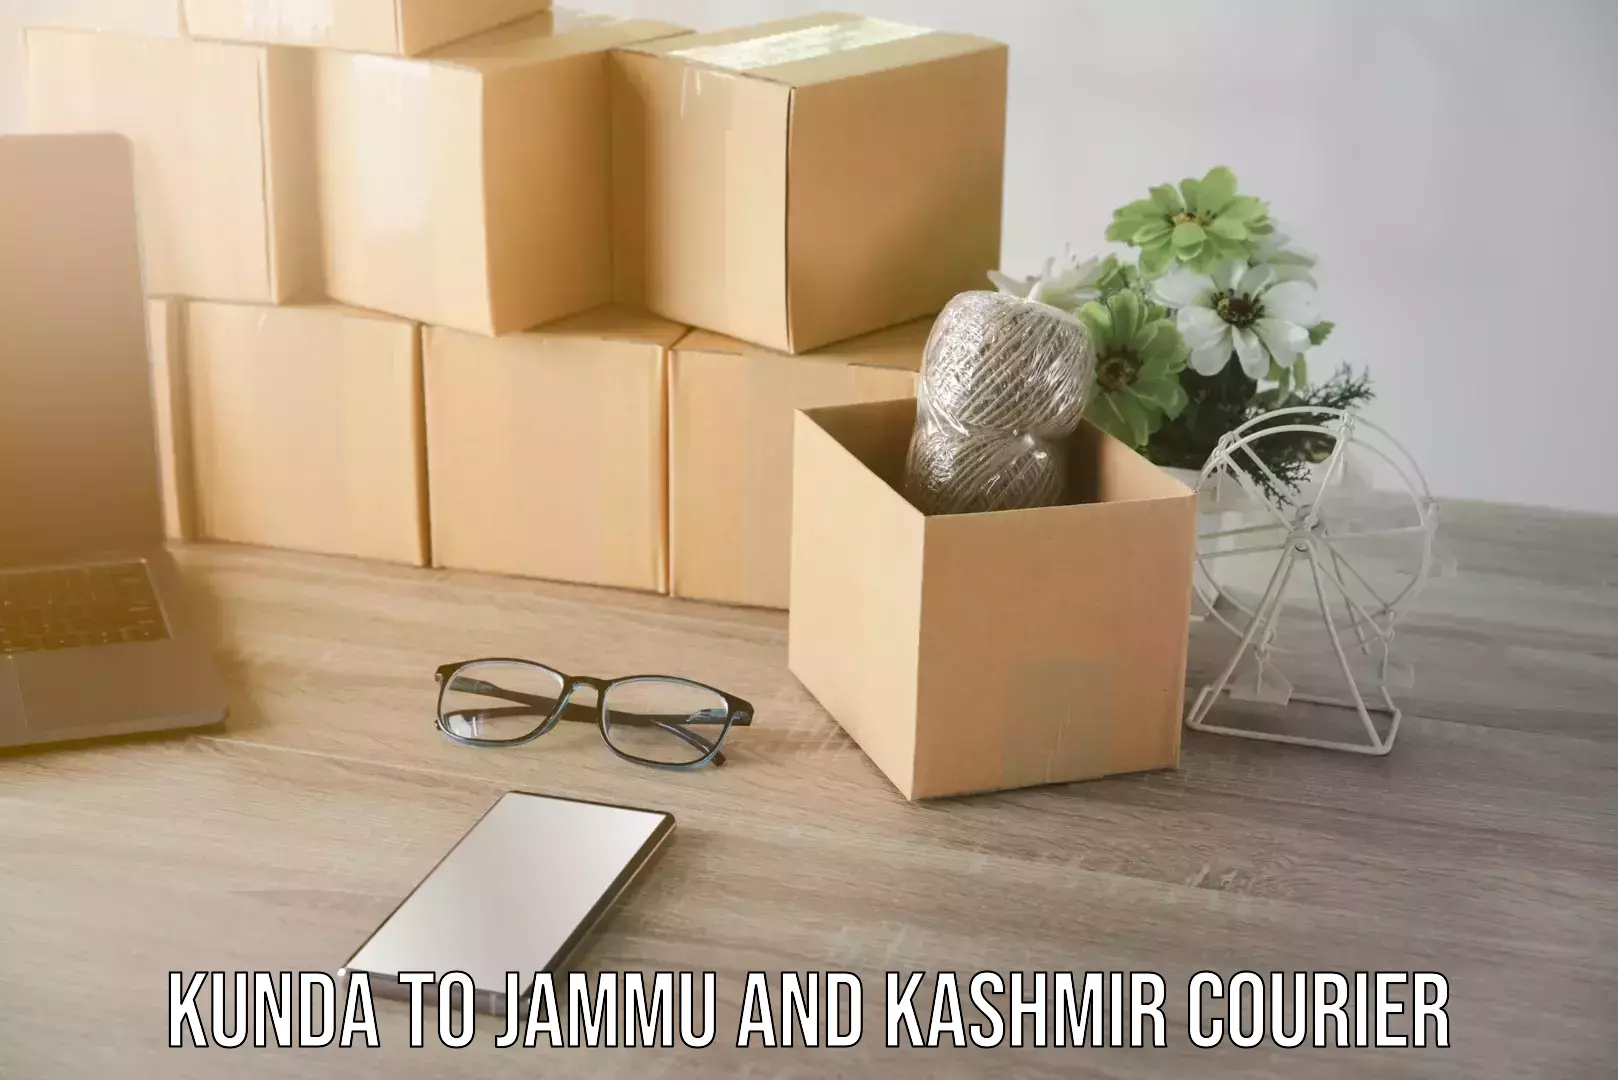 Moving and packing experts Kunda to Jammu and Kashmir